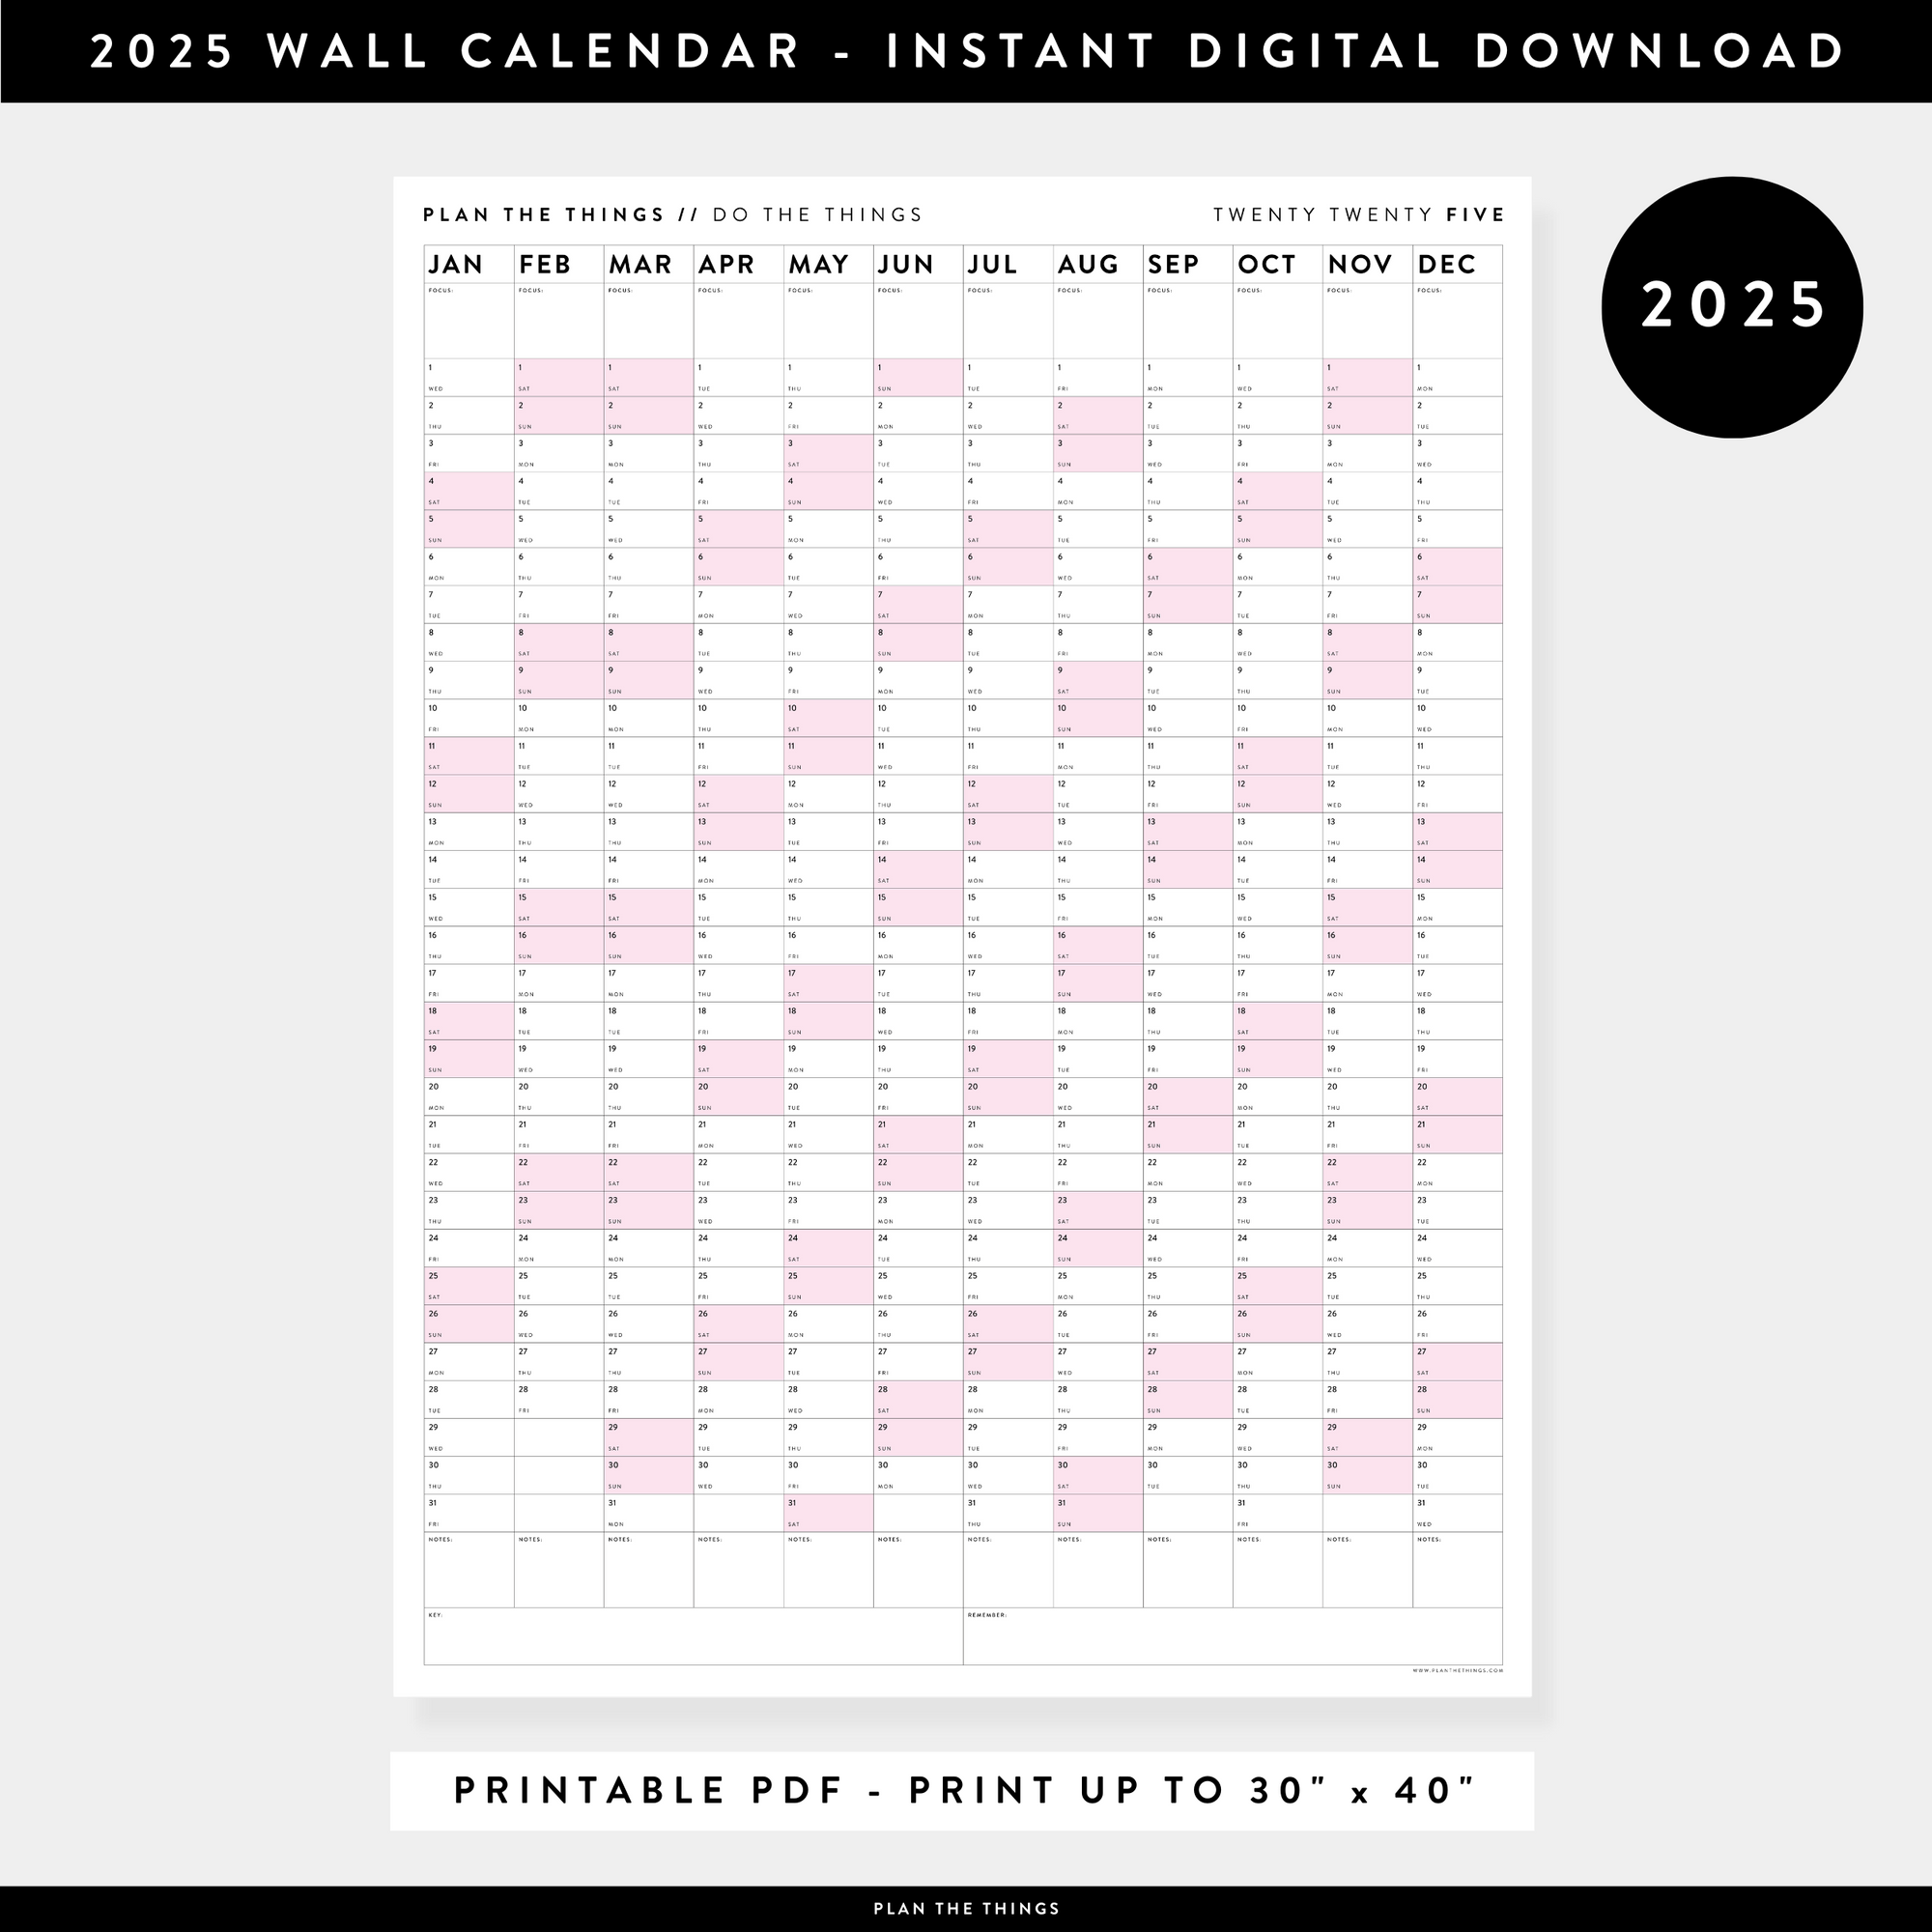 PRINTABLE VERTICAL 2025 WALL CALENDAR WITH PINK WEEKENDS - INSTANT DOWNLOAD